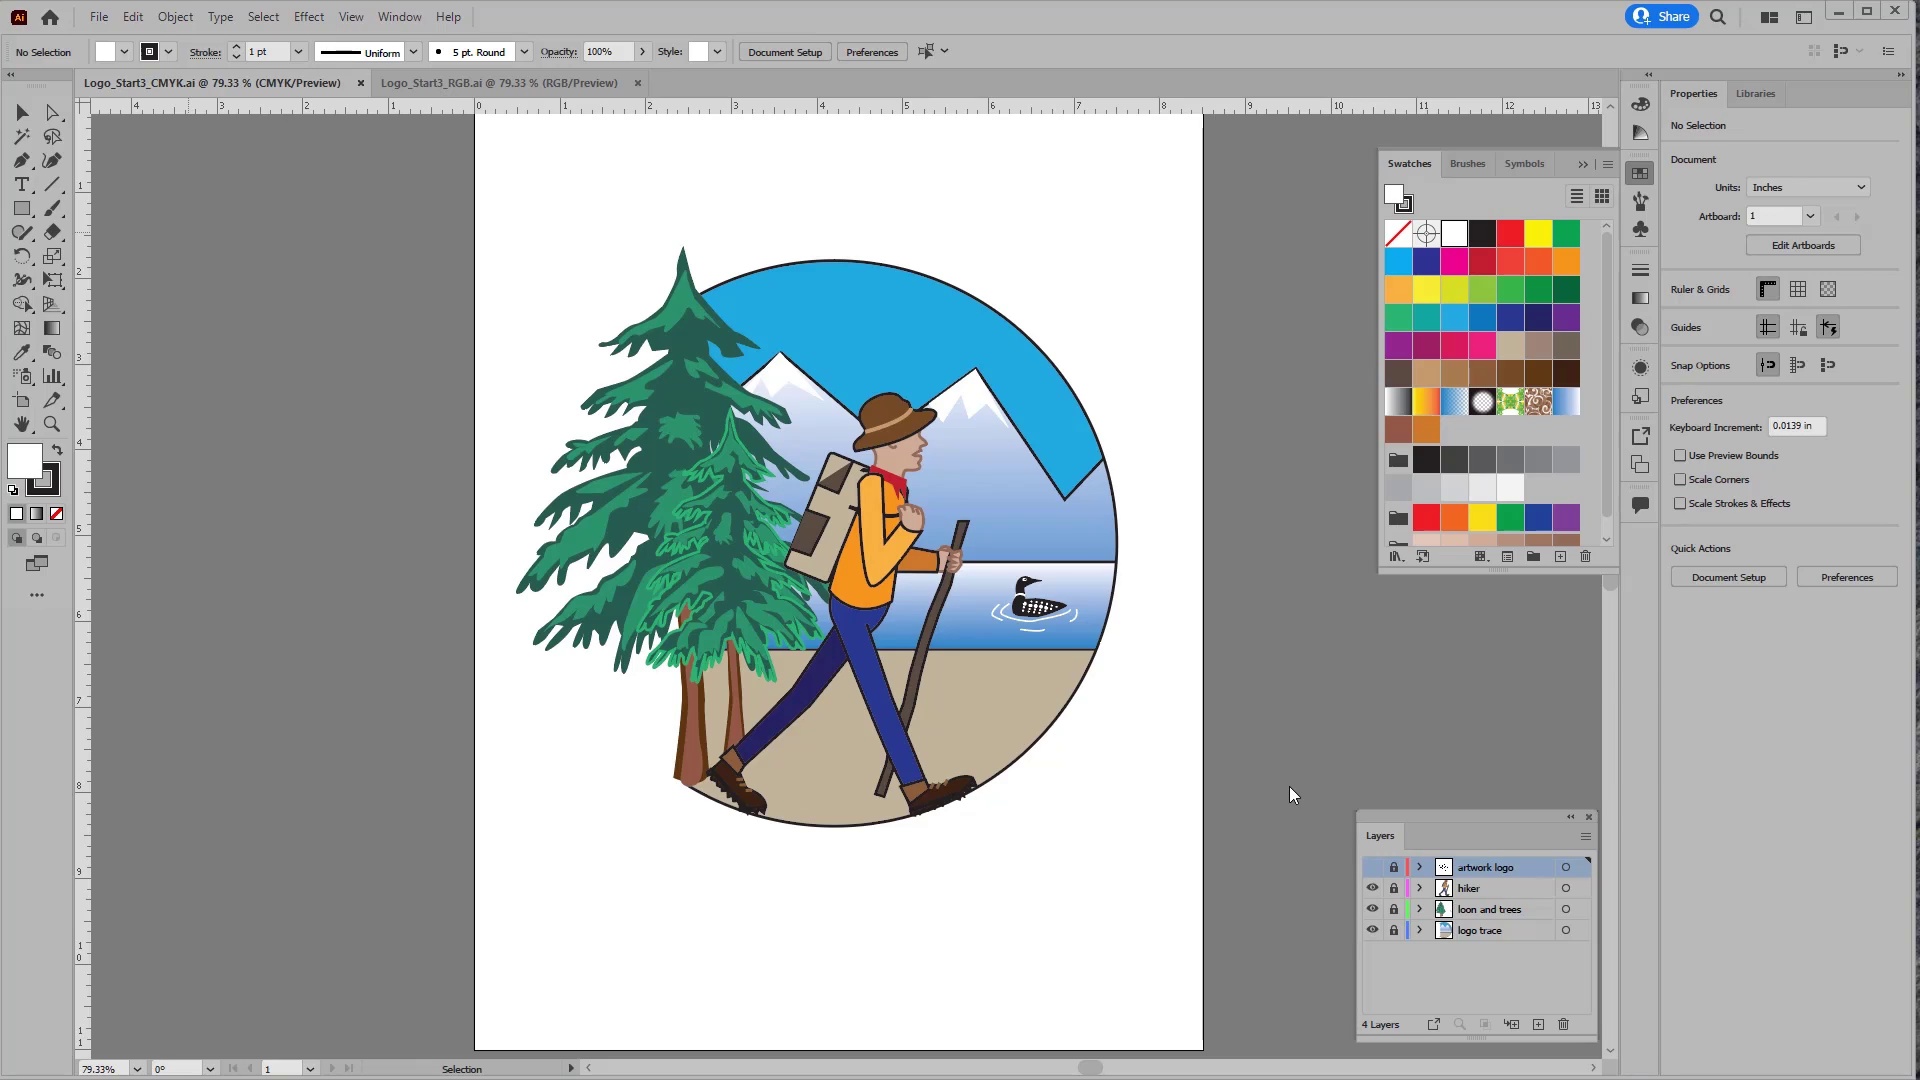 Designing Professional Logos – Part 2 With Photoshop and Illustrator